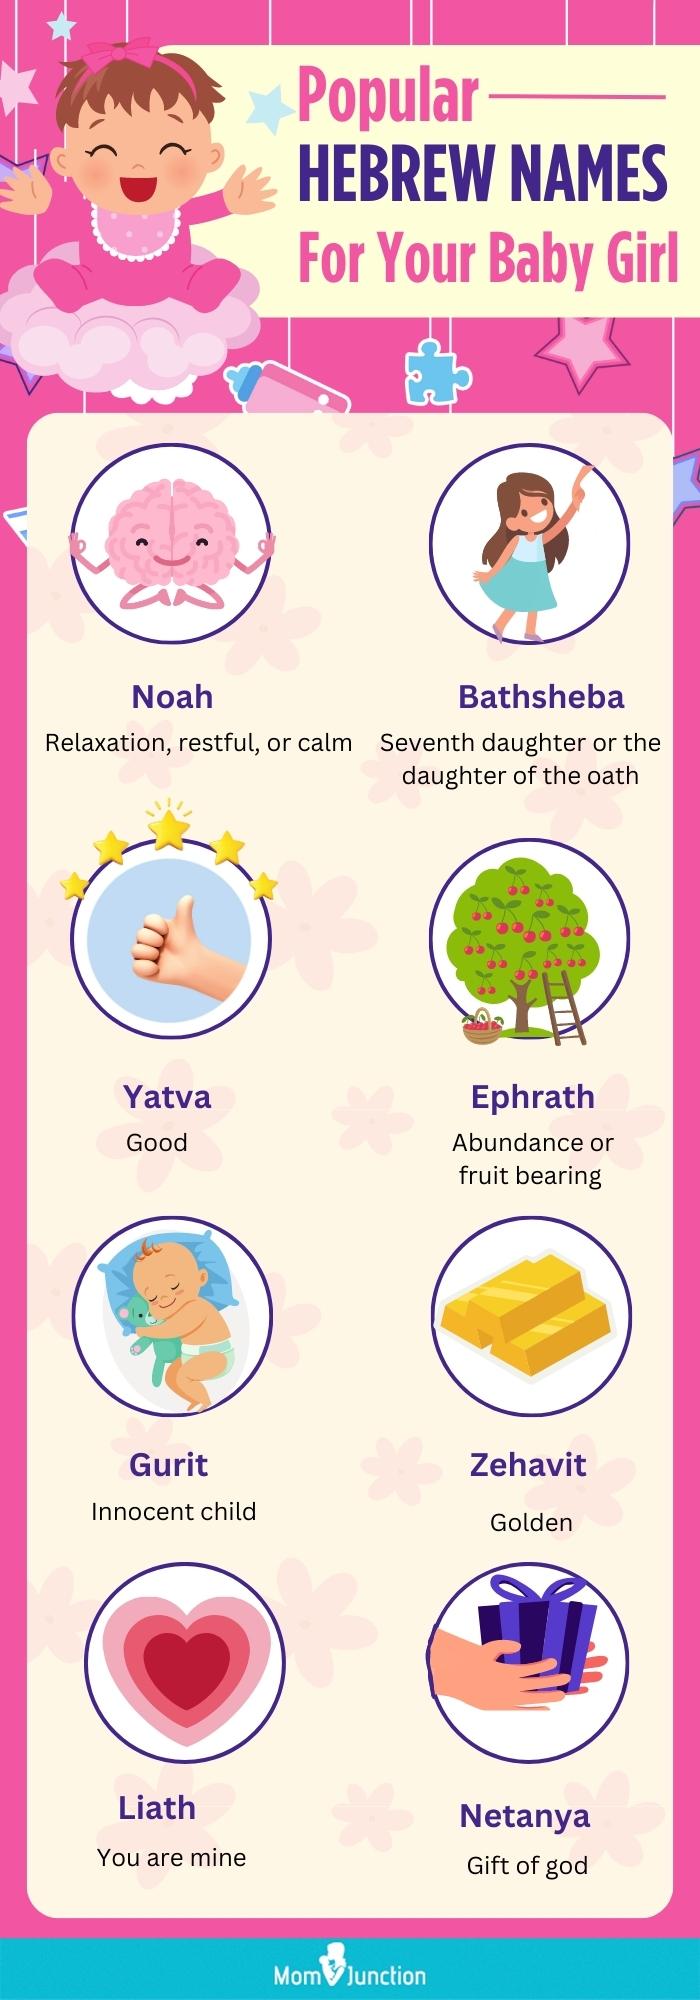 popular hebrew names for your baby girl (infographic)